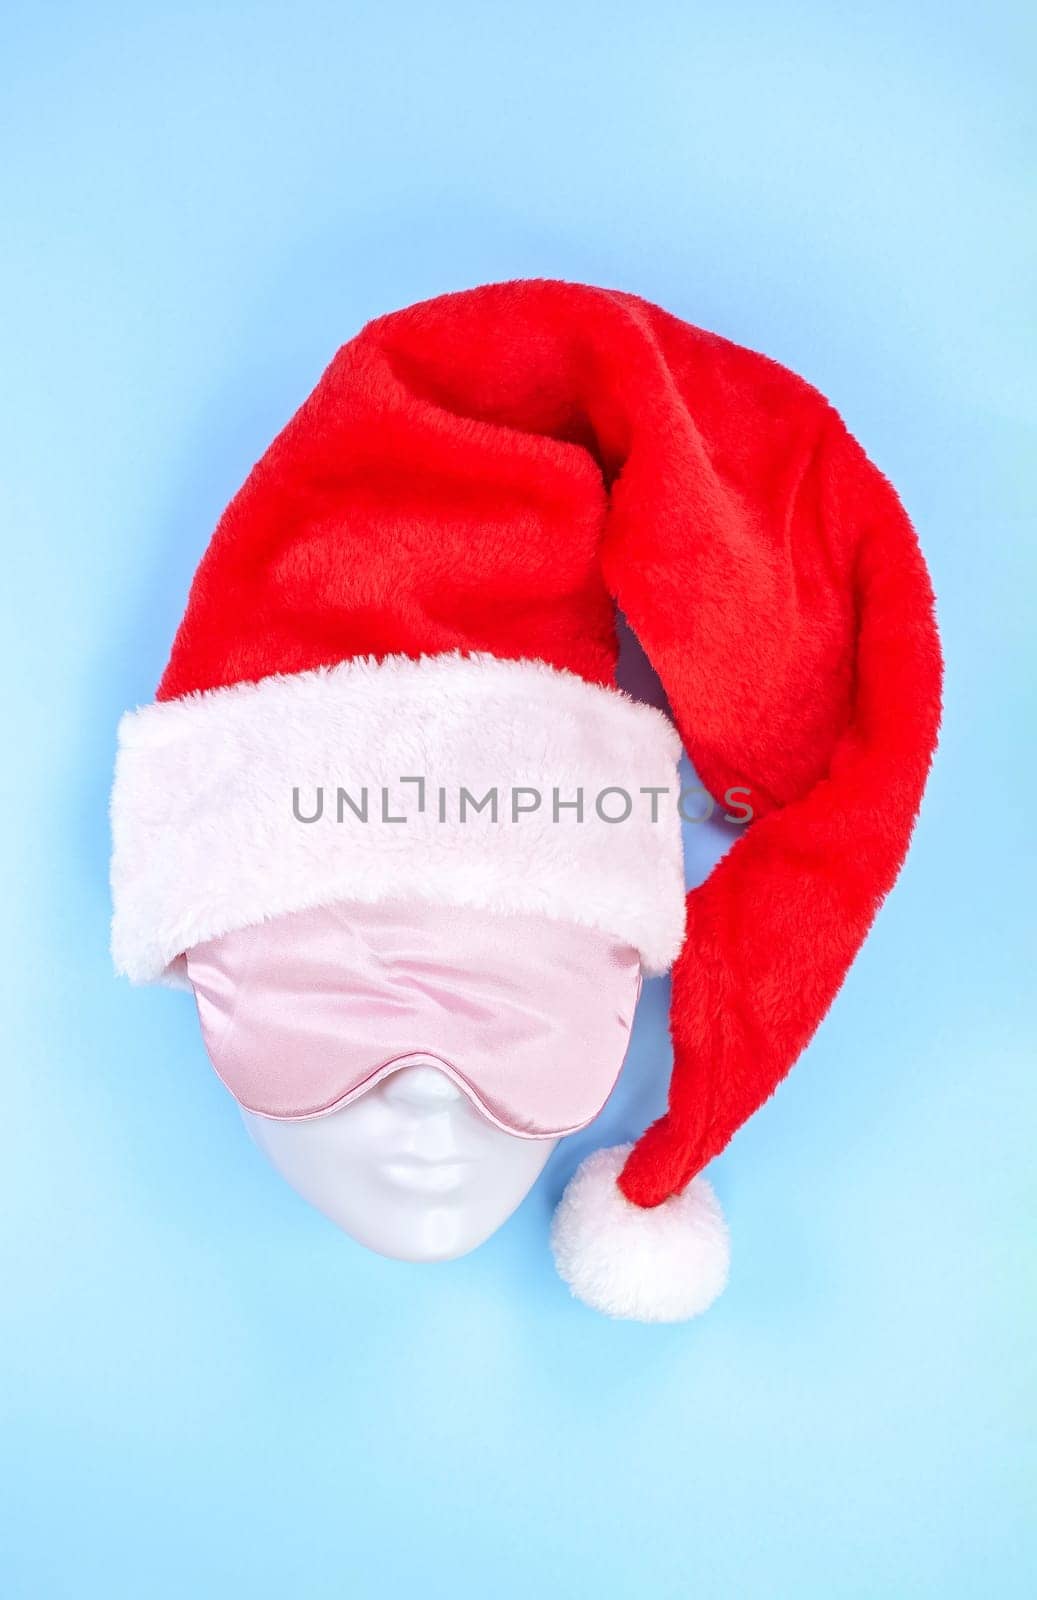 Pink sleeping eye mask on mannequin face with red christmas hat on blue background, sleeping disorder. Holidays, Head accessory. Last minute shopping sickness, Plastic face. by JuliaDorian